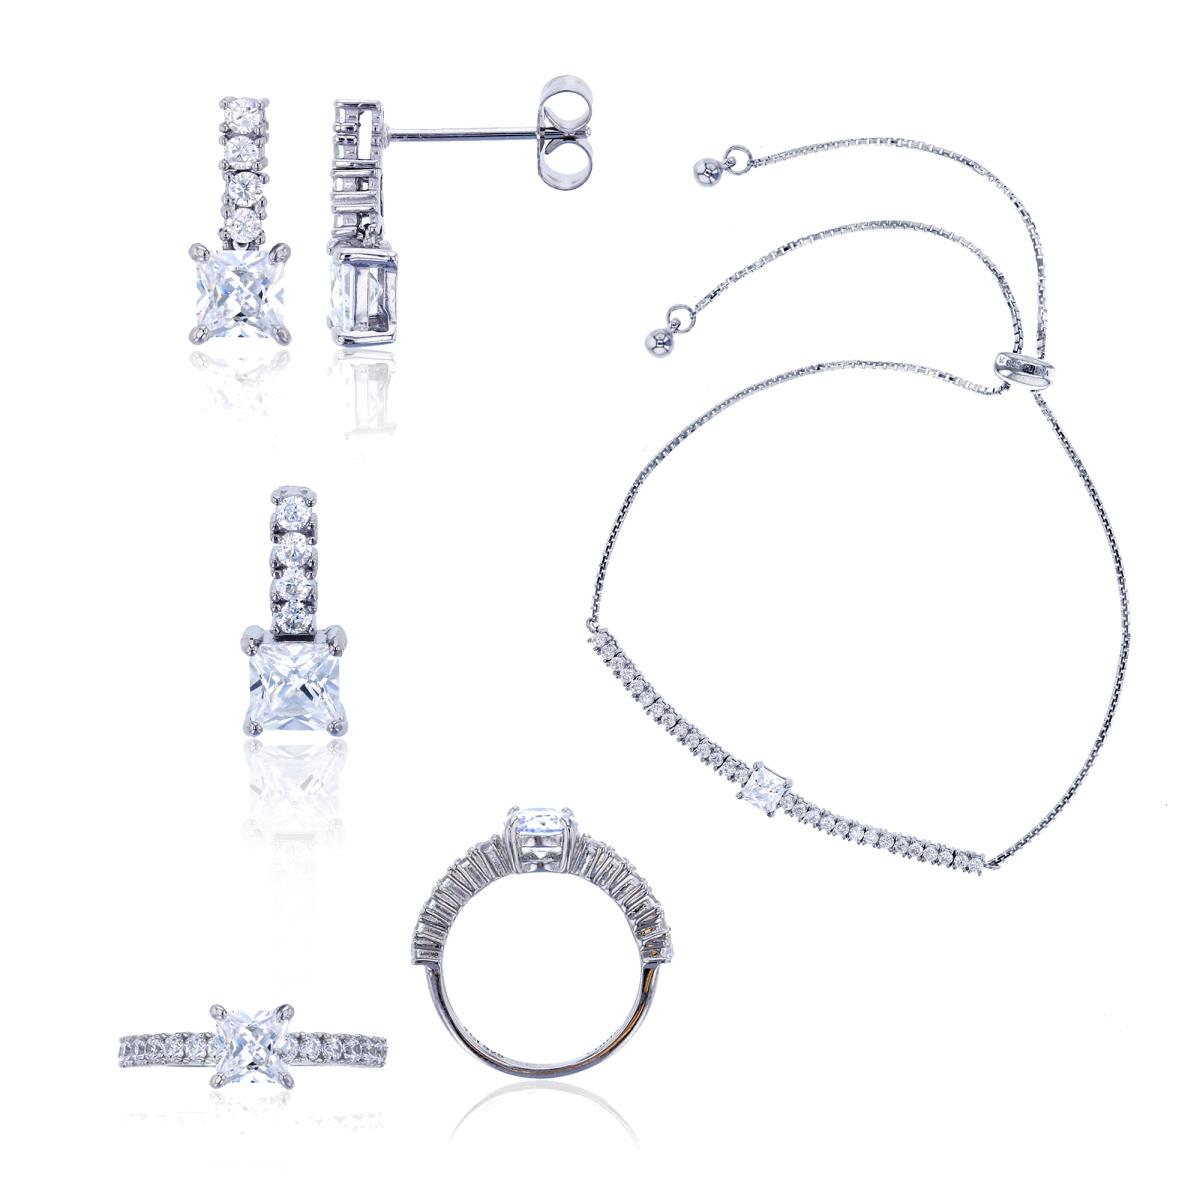 Sterling Silver Rhodium 5mm Princess Cut Jewelry Set (Bracelet, Earring, Ring and 18" Necklace)